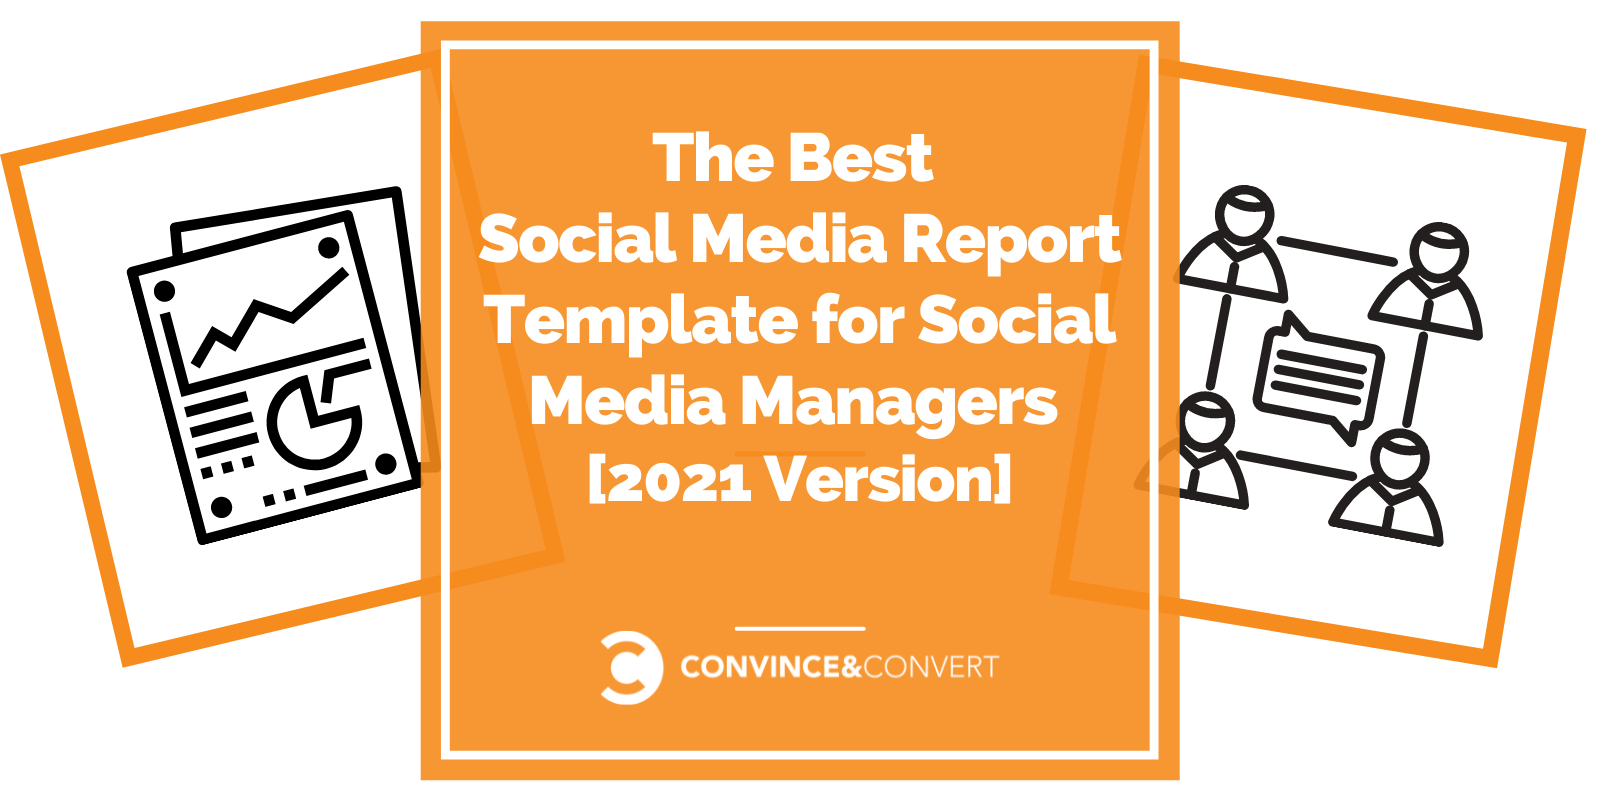 The Best Social Media Report Template for Social Media Managers [2021 Version] - SuperMetrics